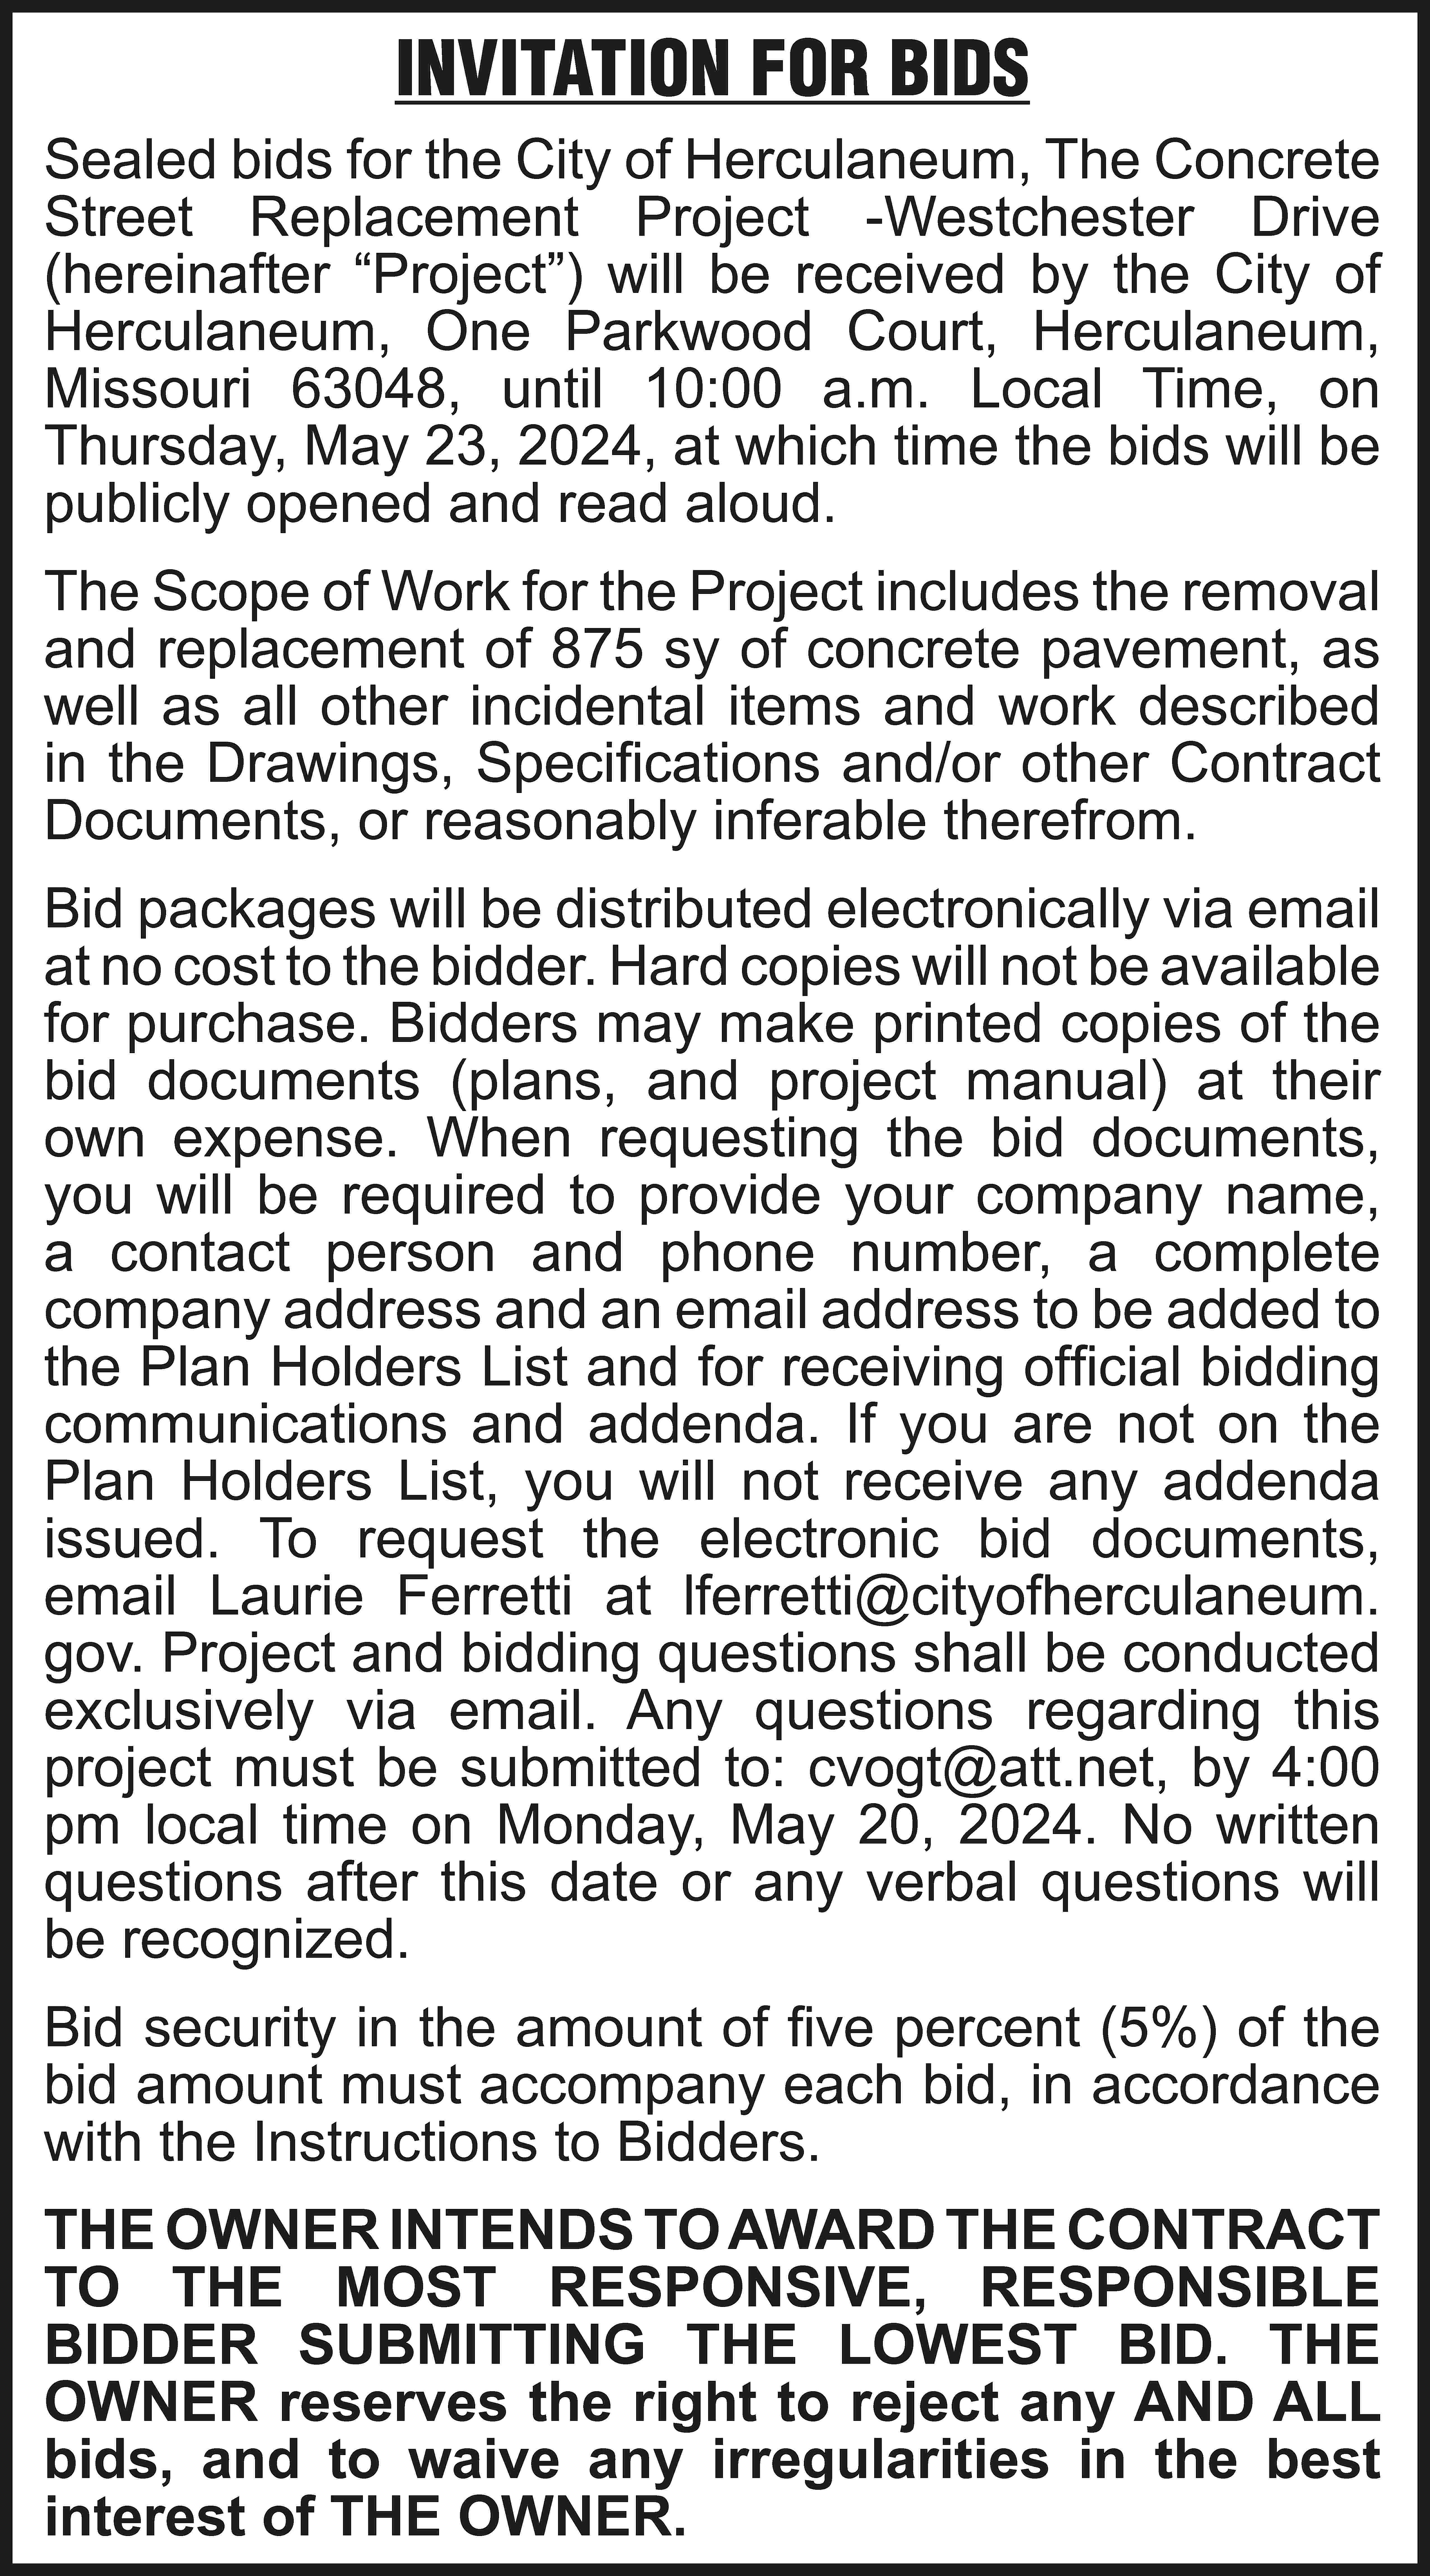 INVITATION FOR BIDS Sealed bids  INVITATION FOR BIDS Sealed bids for the City of Herculaneum, The Concrete Street Replacement Project -Westchester Drive (hereinafter “Project”) will be received by the City of Herculaneum, One Parkwood Court, Herculaneum, Missouri 63048, until 10:00 a.m. Local Time, on Thursday, May 23, 2024, at which time the bids will be publicly opened and read aloud. The Scope of Work for the Project includes the removal and replacement of 875 sy of concrete pavement, as well as all other incidental items and work described in the Drawings, Specifications and/or other Contract Documents, or reasonably inferable therefrom. Bid packages will be distributed electronically via email at no cost to the bidder. Hard copies will not be available for purchase. Bidders may make printed copies of the bid documents (plans, and project manual) at their own expense. When requesting the bid documents, you will be required to provide your company name, a contact person and phone number, a complete company address and an email address to be added to the Plan Holders List and for receiving official bidding communications and addenda. If you are not on the Plan Holders List, you will not receive any addenda issued. To request the electronic bid documents, email Laurie Ferretti at lferretti@cityofherculaneum. gov. Project and bidding questions shall be conducted exclusively via email. Any questions regarding this project must be submitted to: cvogt@att.net, by 4:00 pm local time on Monday, May 20, 2024. No written questions after this date or any verbal questions will be recognized. Bid security in the amount of five percent (5%) of the bid amount must accompany each bid, in accordance with the Instructions to Bidders. THE OWNER INTENDS TO AWARD THE CONTRACT TO THE MOST RESPONSIVE, RESPONSIBLE BIDDER SUBMITTING THE LOWEST BID. THE OWNER reserves the right to reject any AND ALL bids, and to waive any irregularities in the best interest of THE OWNER.